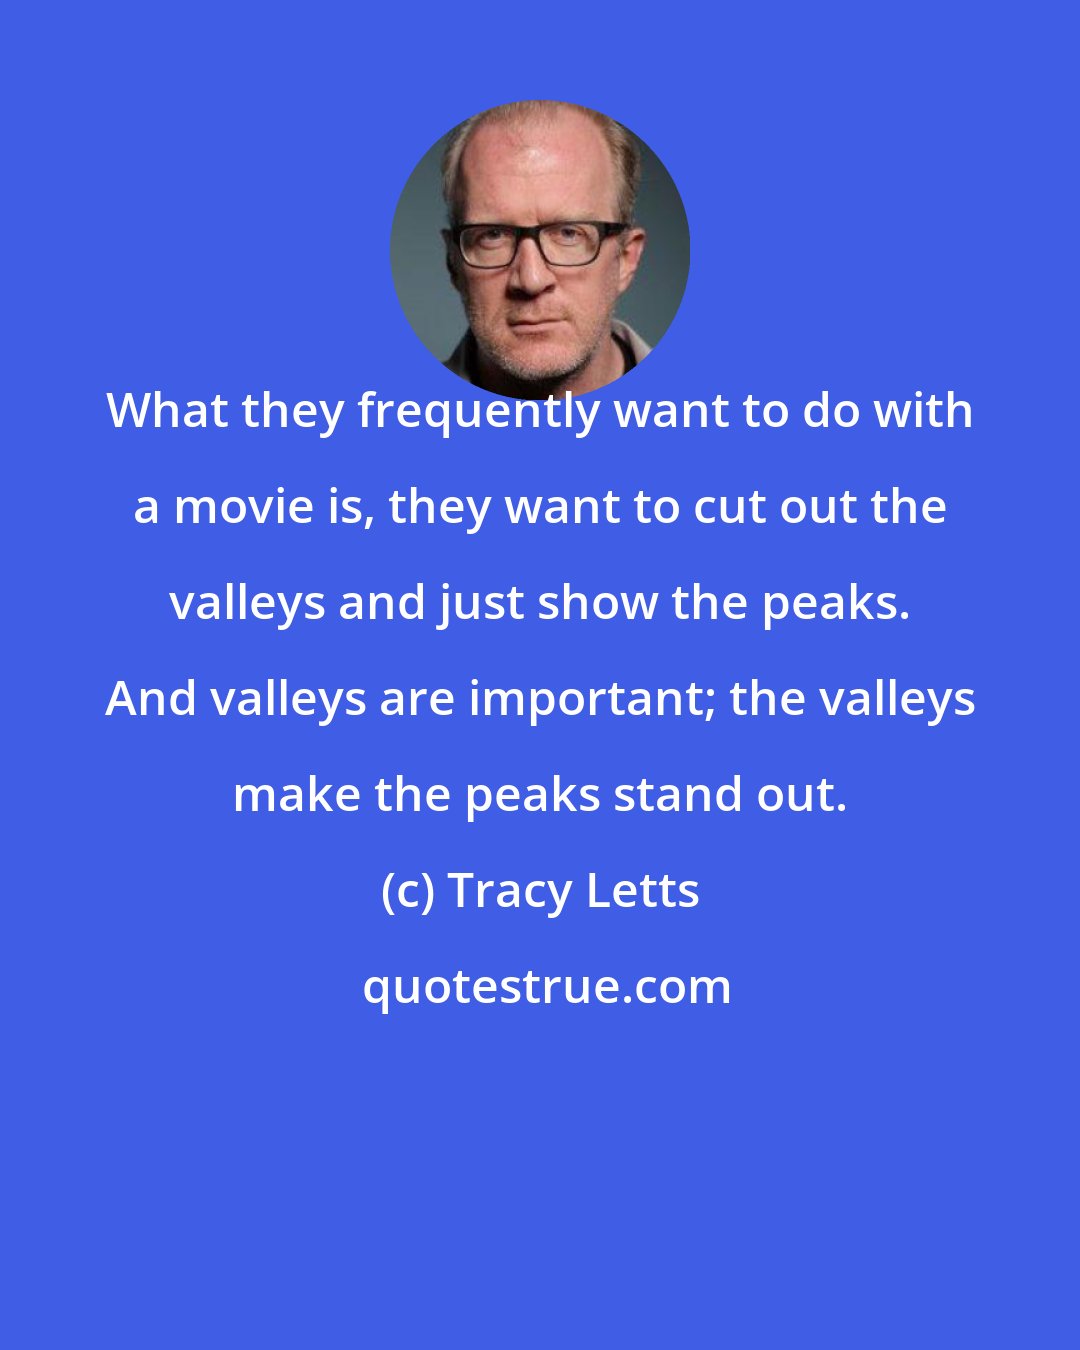 Tracy Letts: What they frequently want to do with a movie is, they want to cut out the valleys and just show the peaks. And valleys are important; the valleys make the peaks stand out.